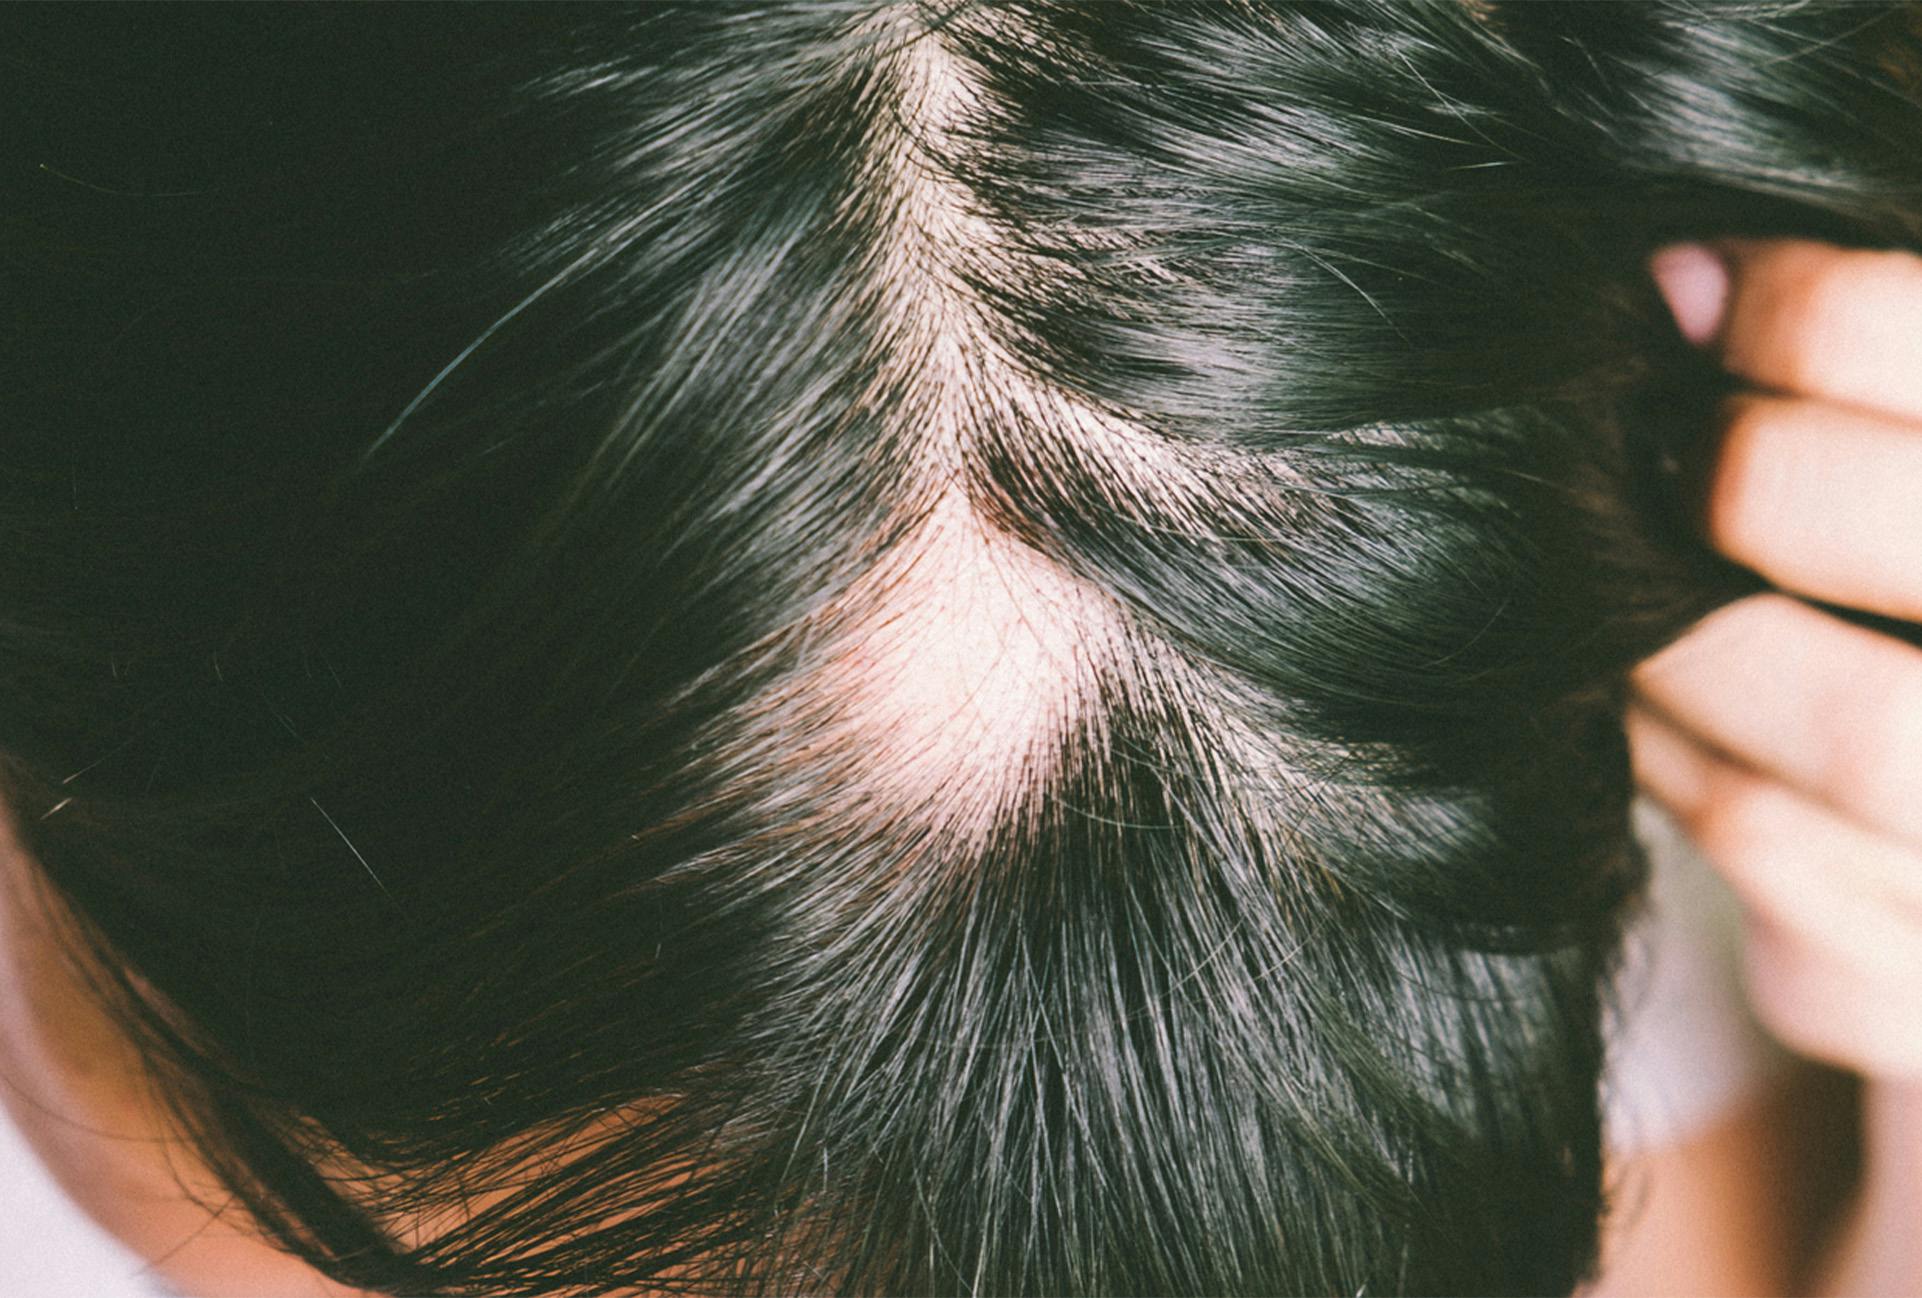 person experiencing hair loss